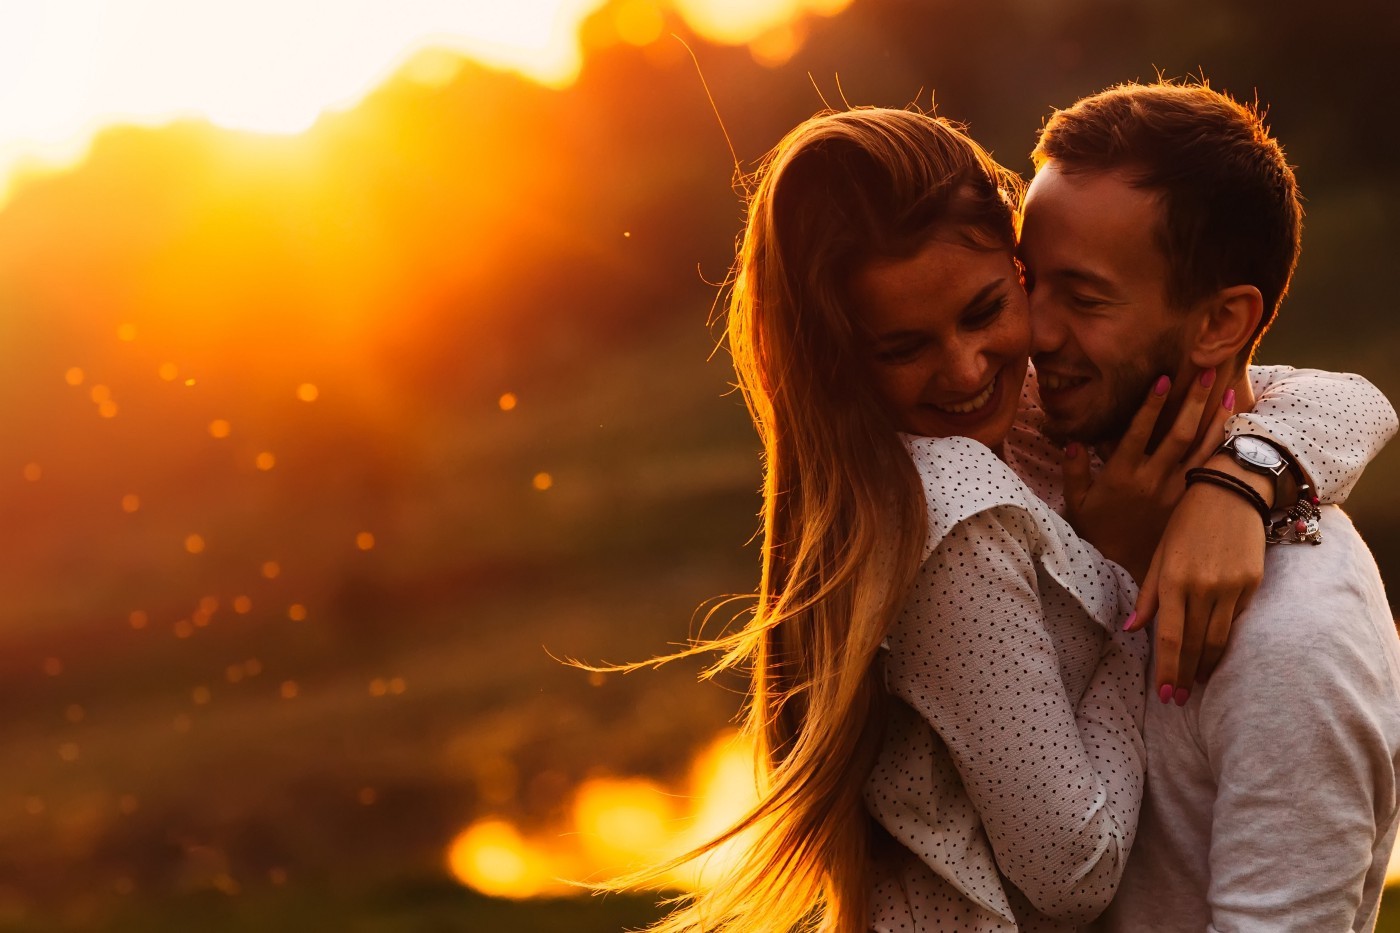 The 7 best things you can do to find love by an elite matchmaker